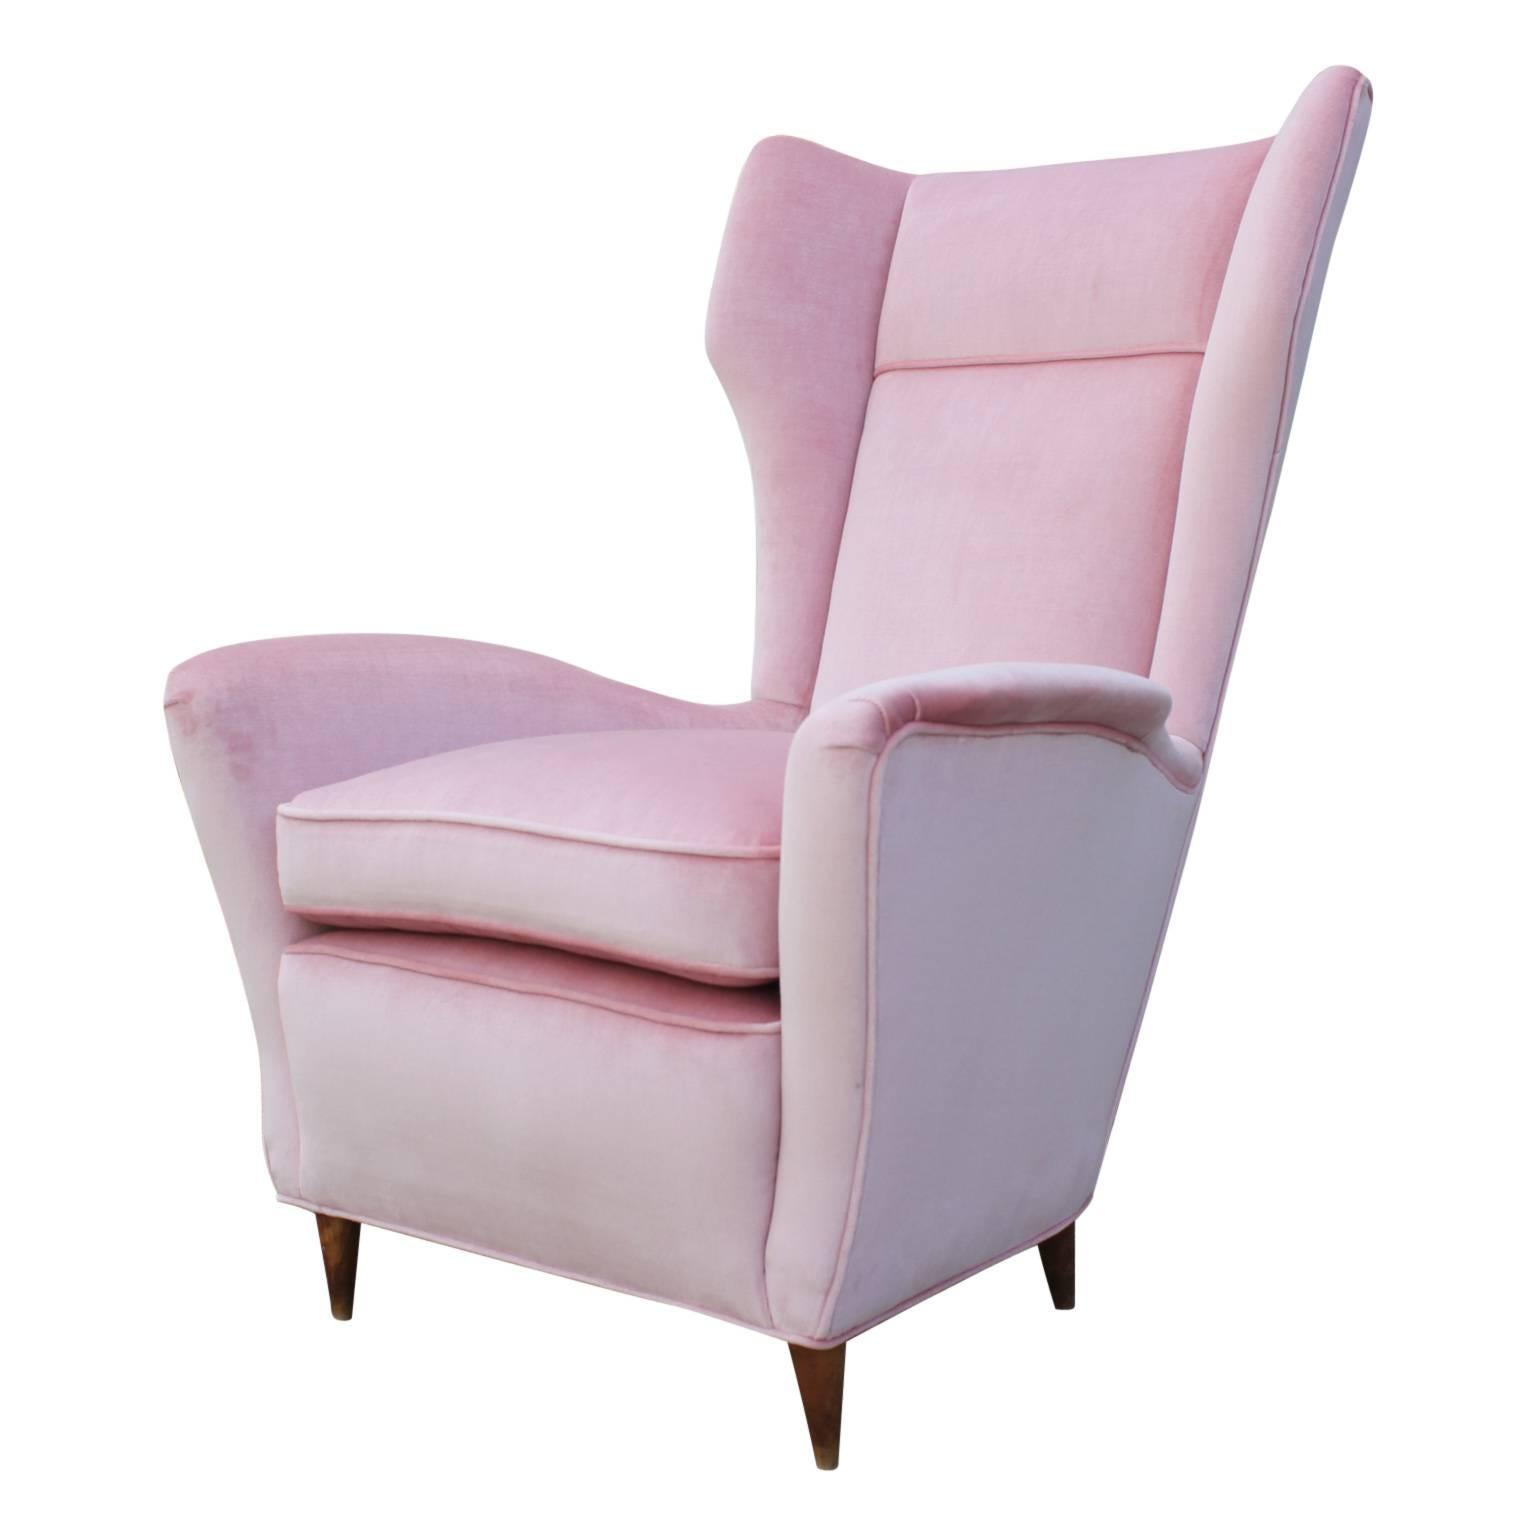 Recently reupholstered Italian wingback chairs in a gorgeous light pink velvet featuring light wood legs that are delicately tapered.